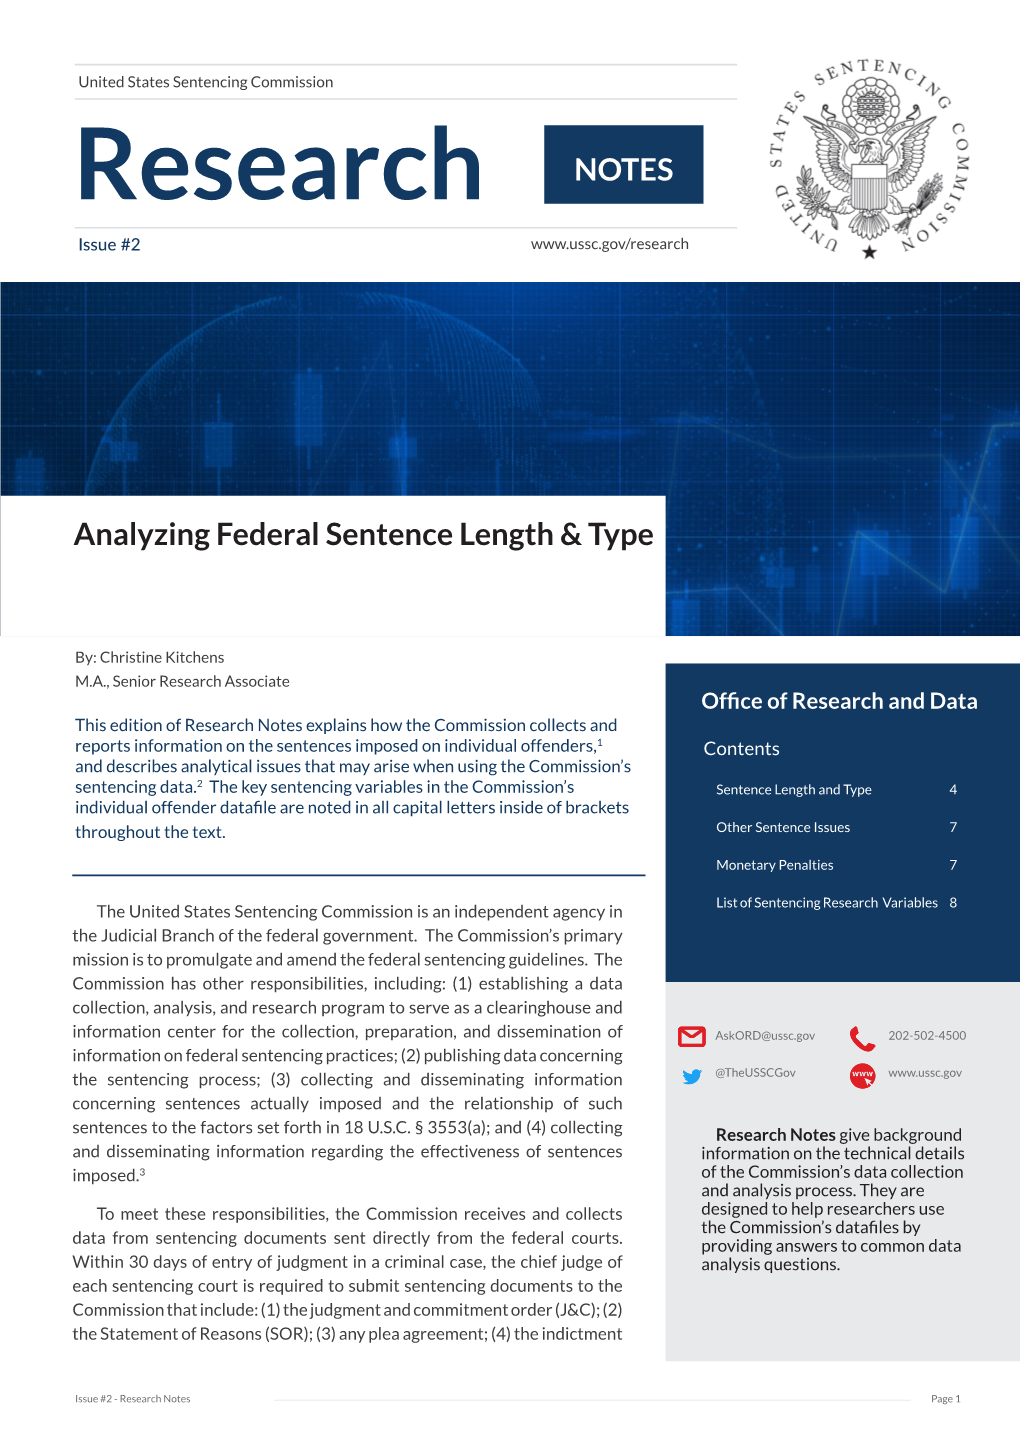 Research Notes, Issue 2: Analyzing Federal Sentence Length & Type